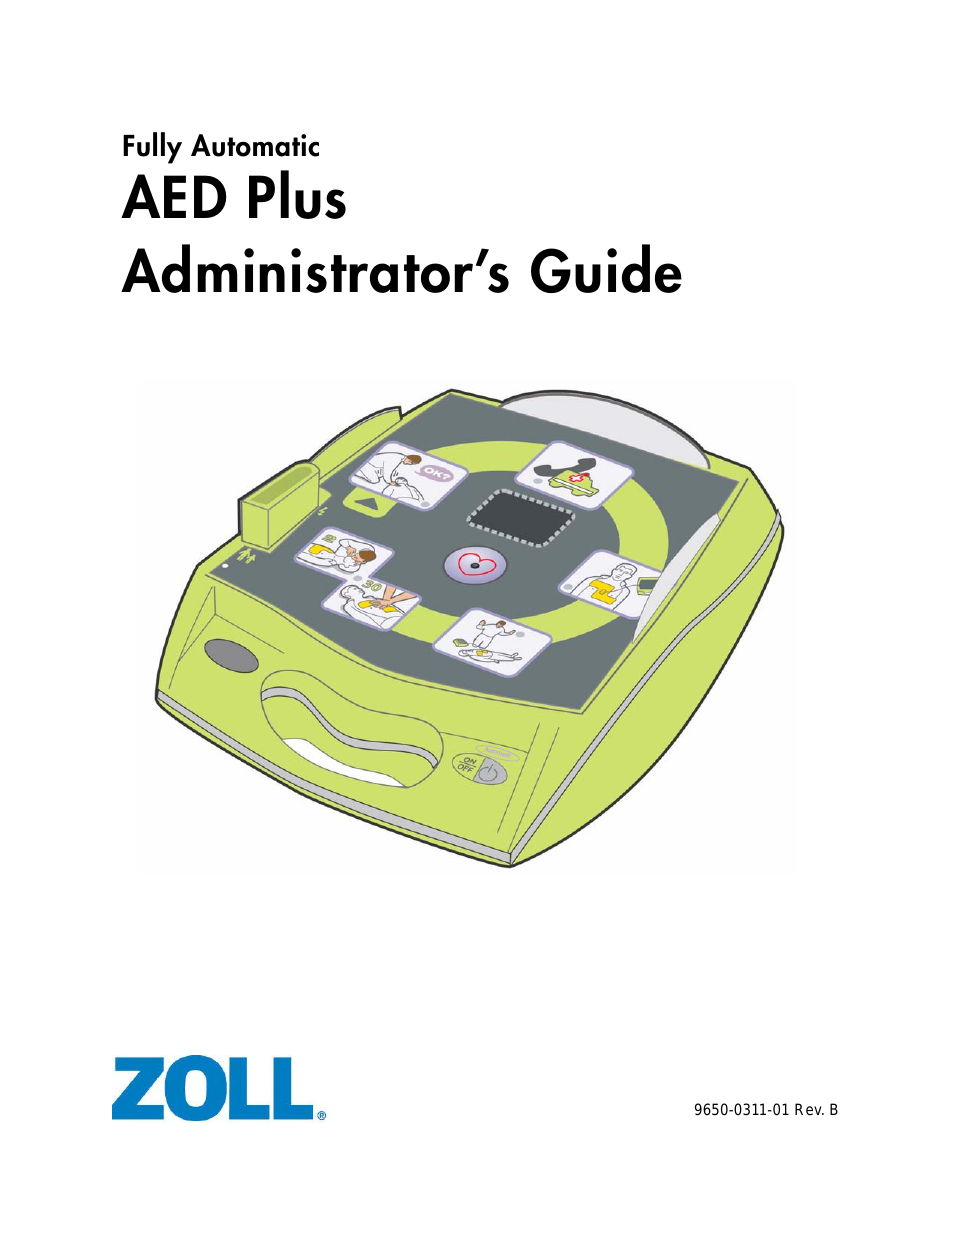 AED Plus Fully Automatic Rev B